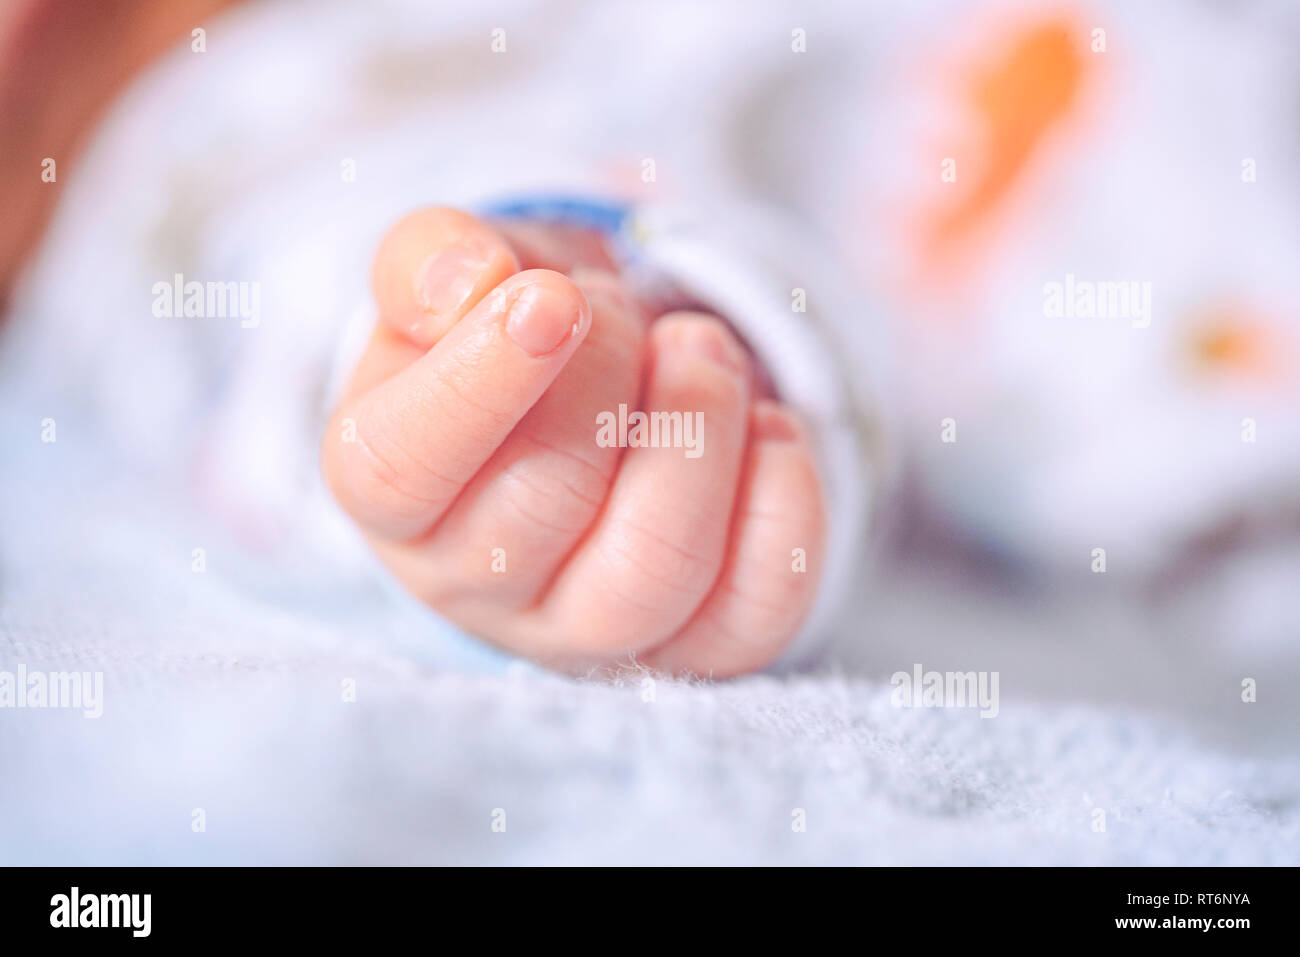 Newborn baby soft-focus tiny fist of an infant with a vintage analog Kodachrome feel. Happy Mothers Day Fathers Day new baby or parenting concept. Stock Photo